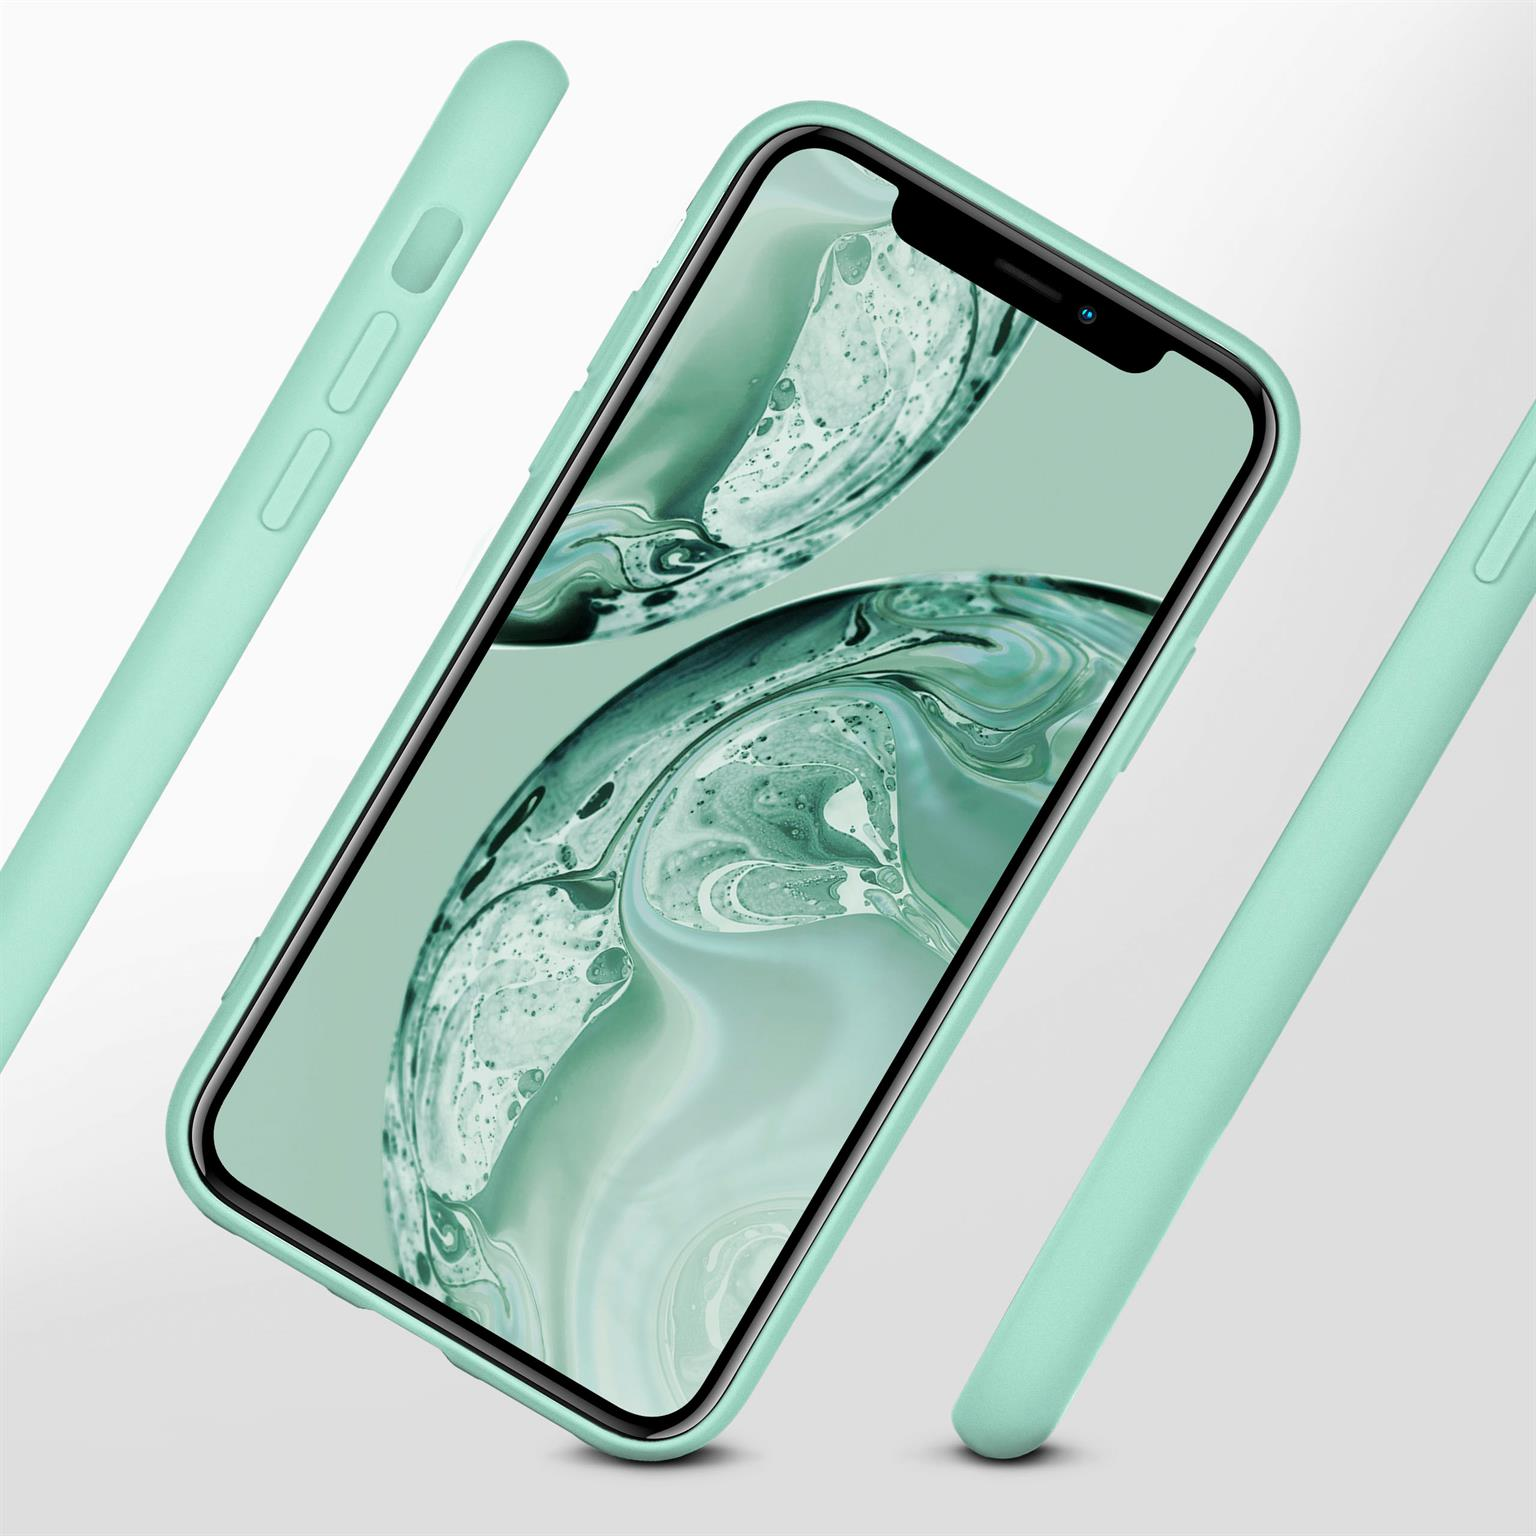 ONEFLOW Soft Apple, iPhone Mint Backcover, Case, XR